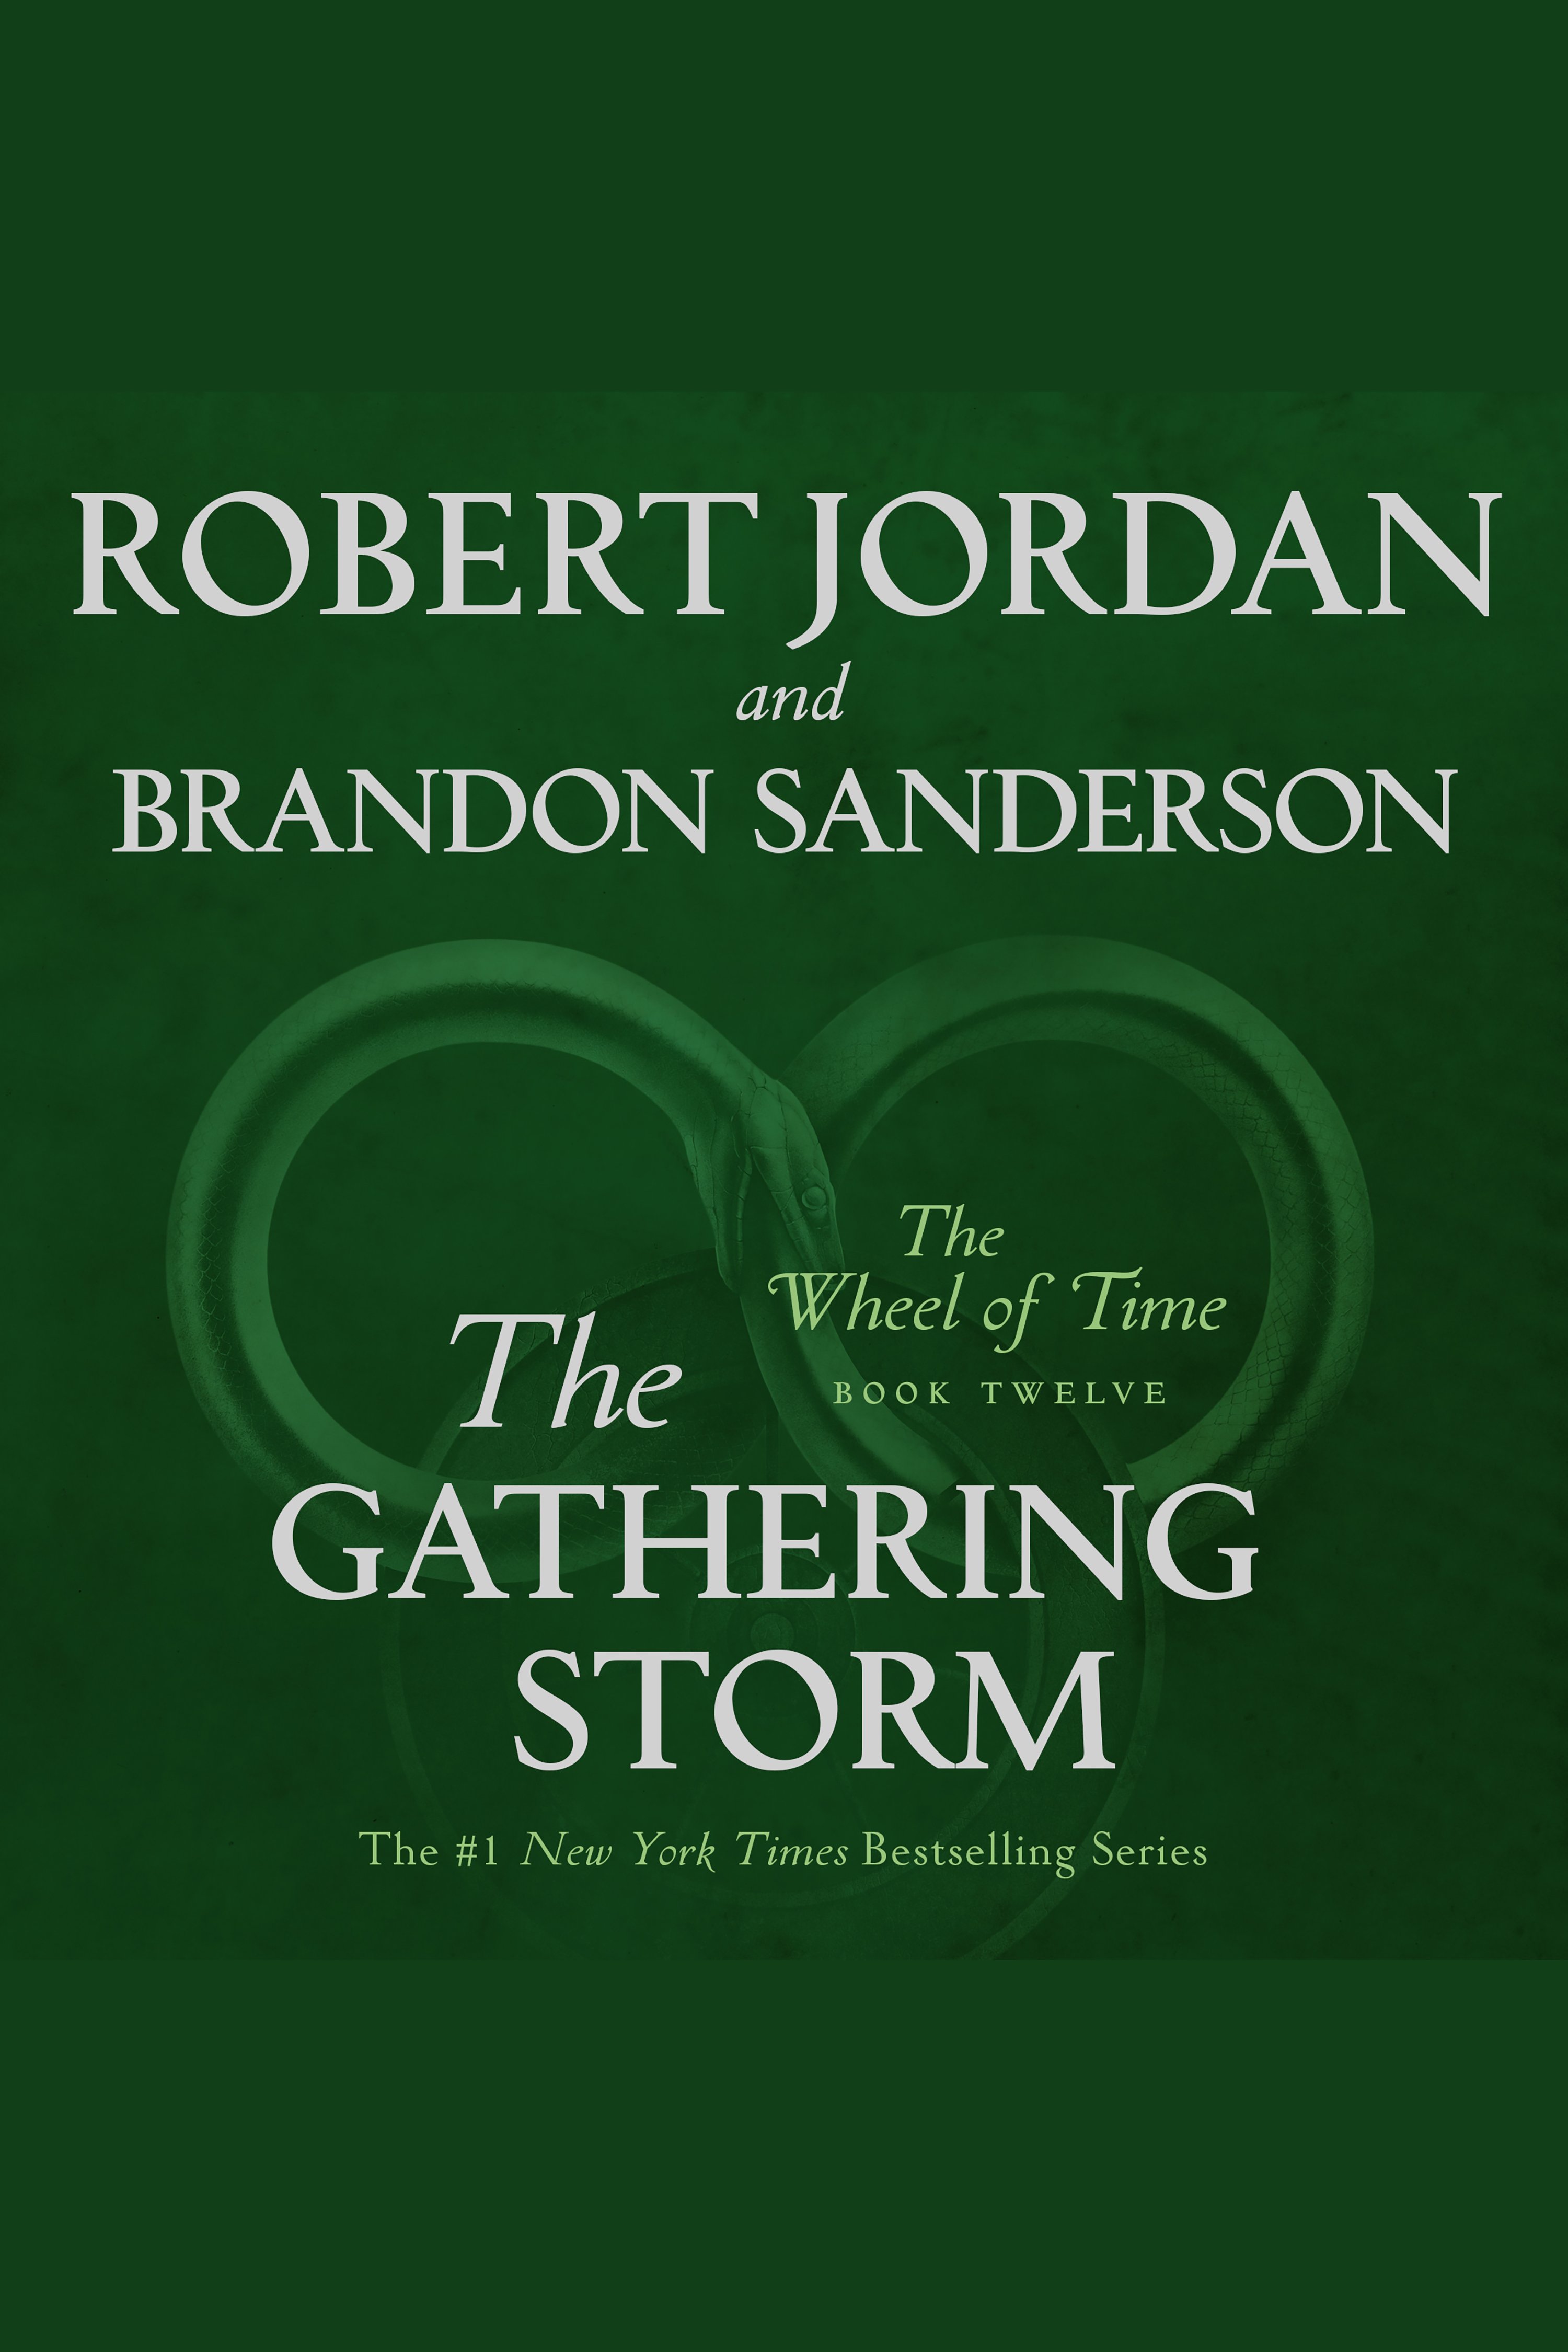 The gathering storm cover image